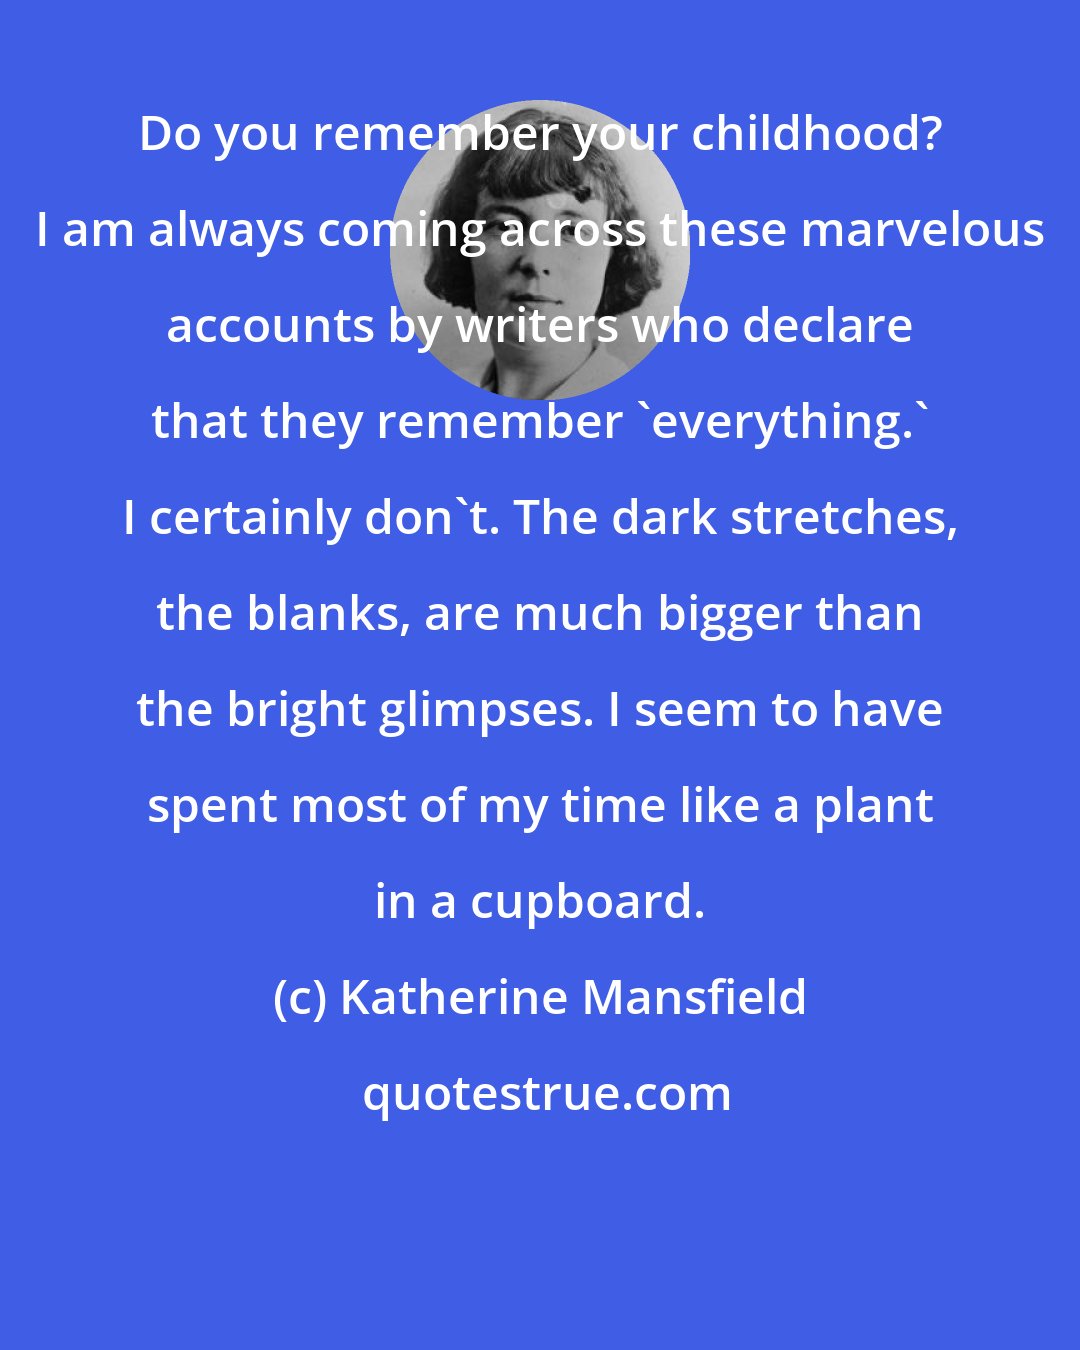 Katherine Mansfield: Do you remember your childhood? I am always coming across these marvelous accounts by writers who declare that they remember 'everything.' I certainly don't. The dark stretches, the blanks, are much bigger than the bright glimpses. I seem to have spent most of my time like a plant in a cupboard.